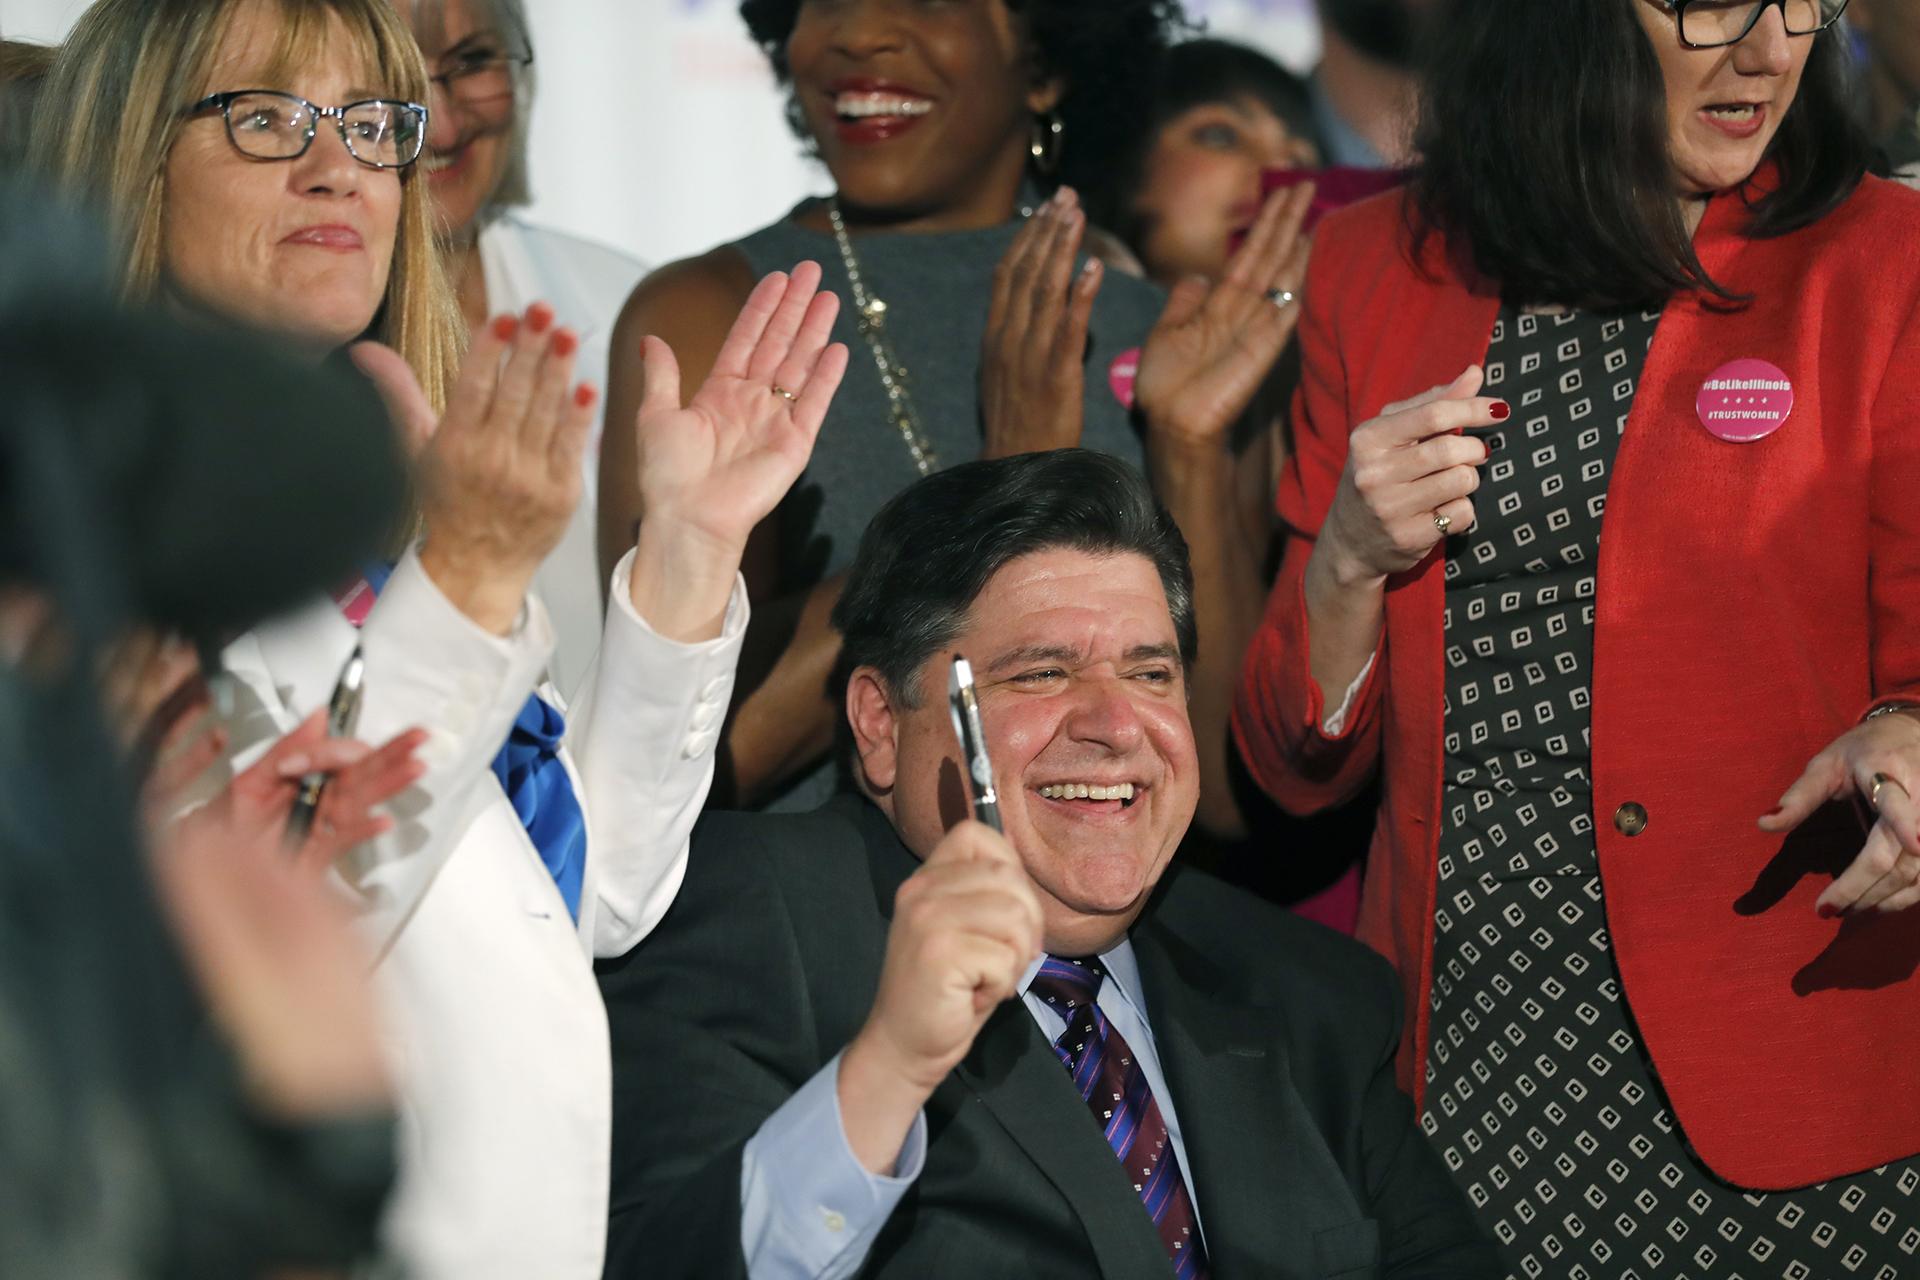 Illinois Gov. J.B. Pritzker signs the Reproductive Health Act into law with bill sponsors Illinois State Senator Melinda Bush, left, and Illinois State Rep. Kelly Cassidy, right, at the Chicago Cultural Center on Wednesday, June 12, 2019. (Jose M. Osorio / Chicago Tribune via AP)